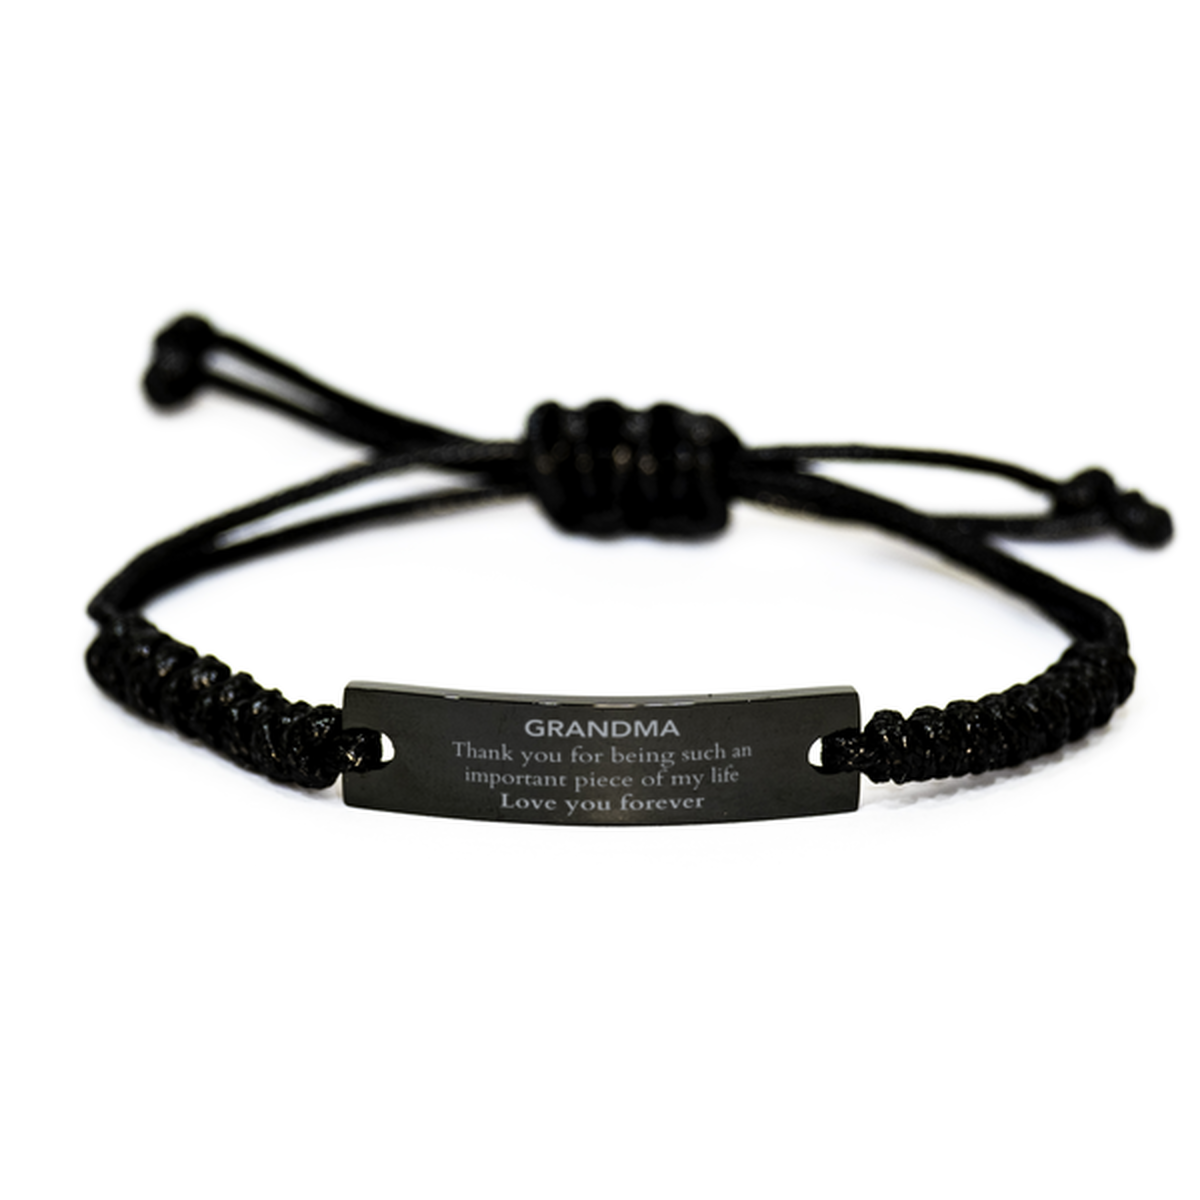 Appropriate Grandma Black Rope Bracelet Epic Birthday Gifts for Grandma Thank you for being such an important piece of my life Grandma Christmas Mothers Fathers Day